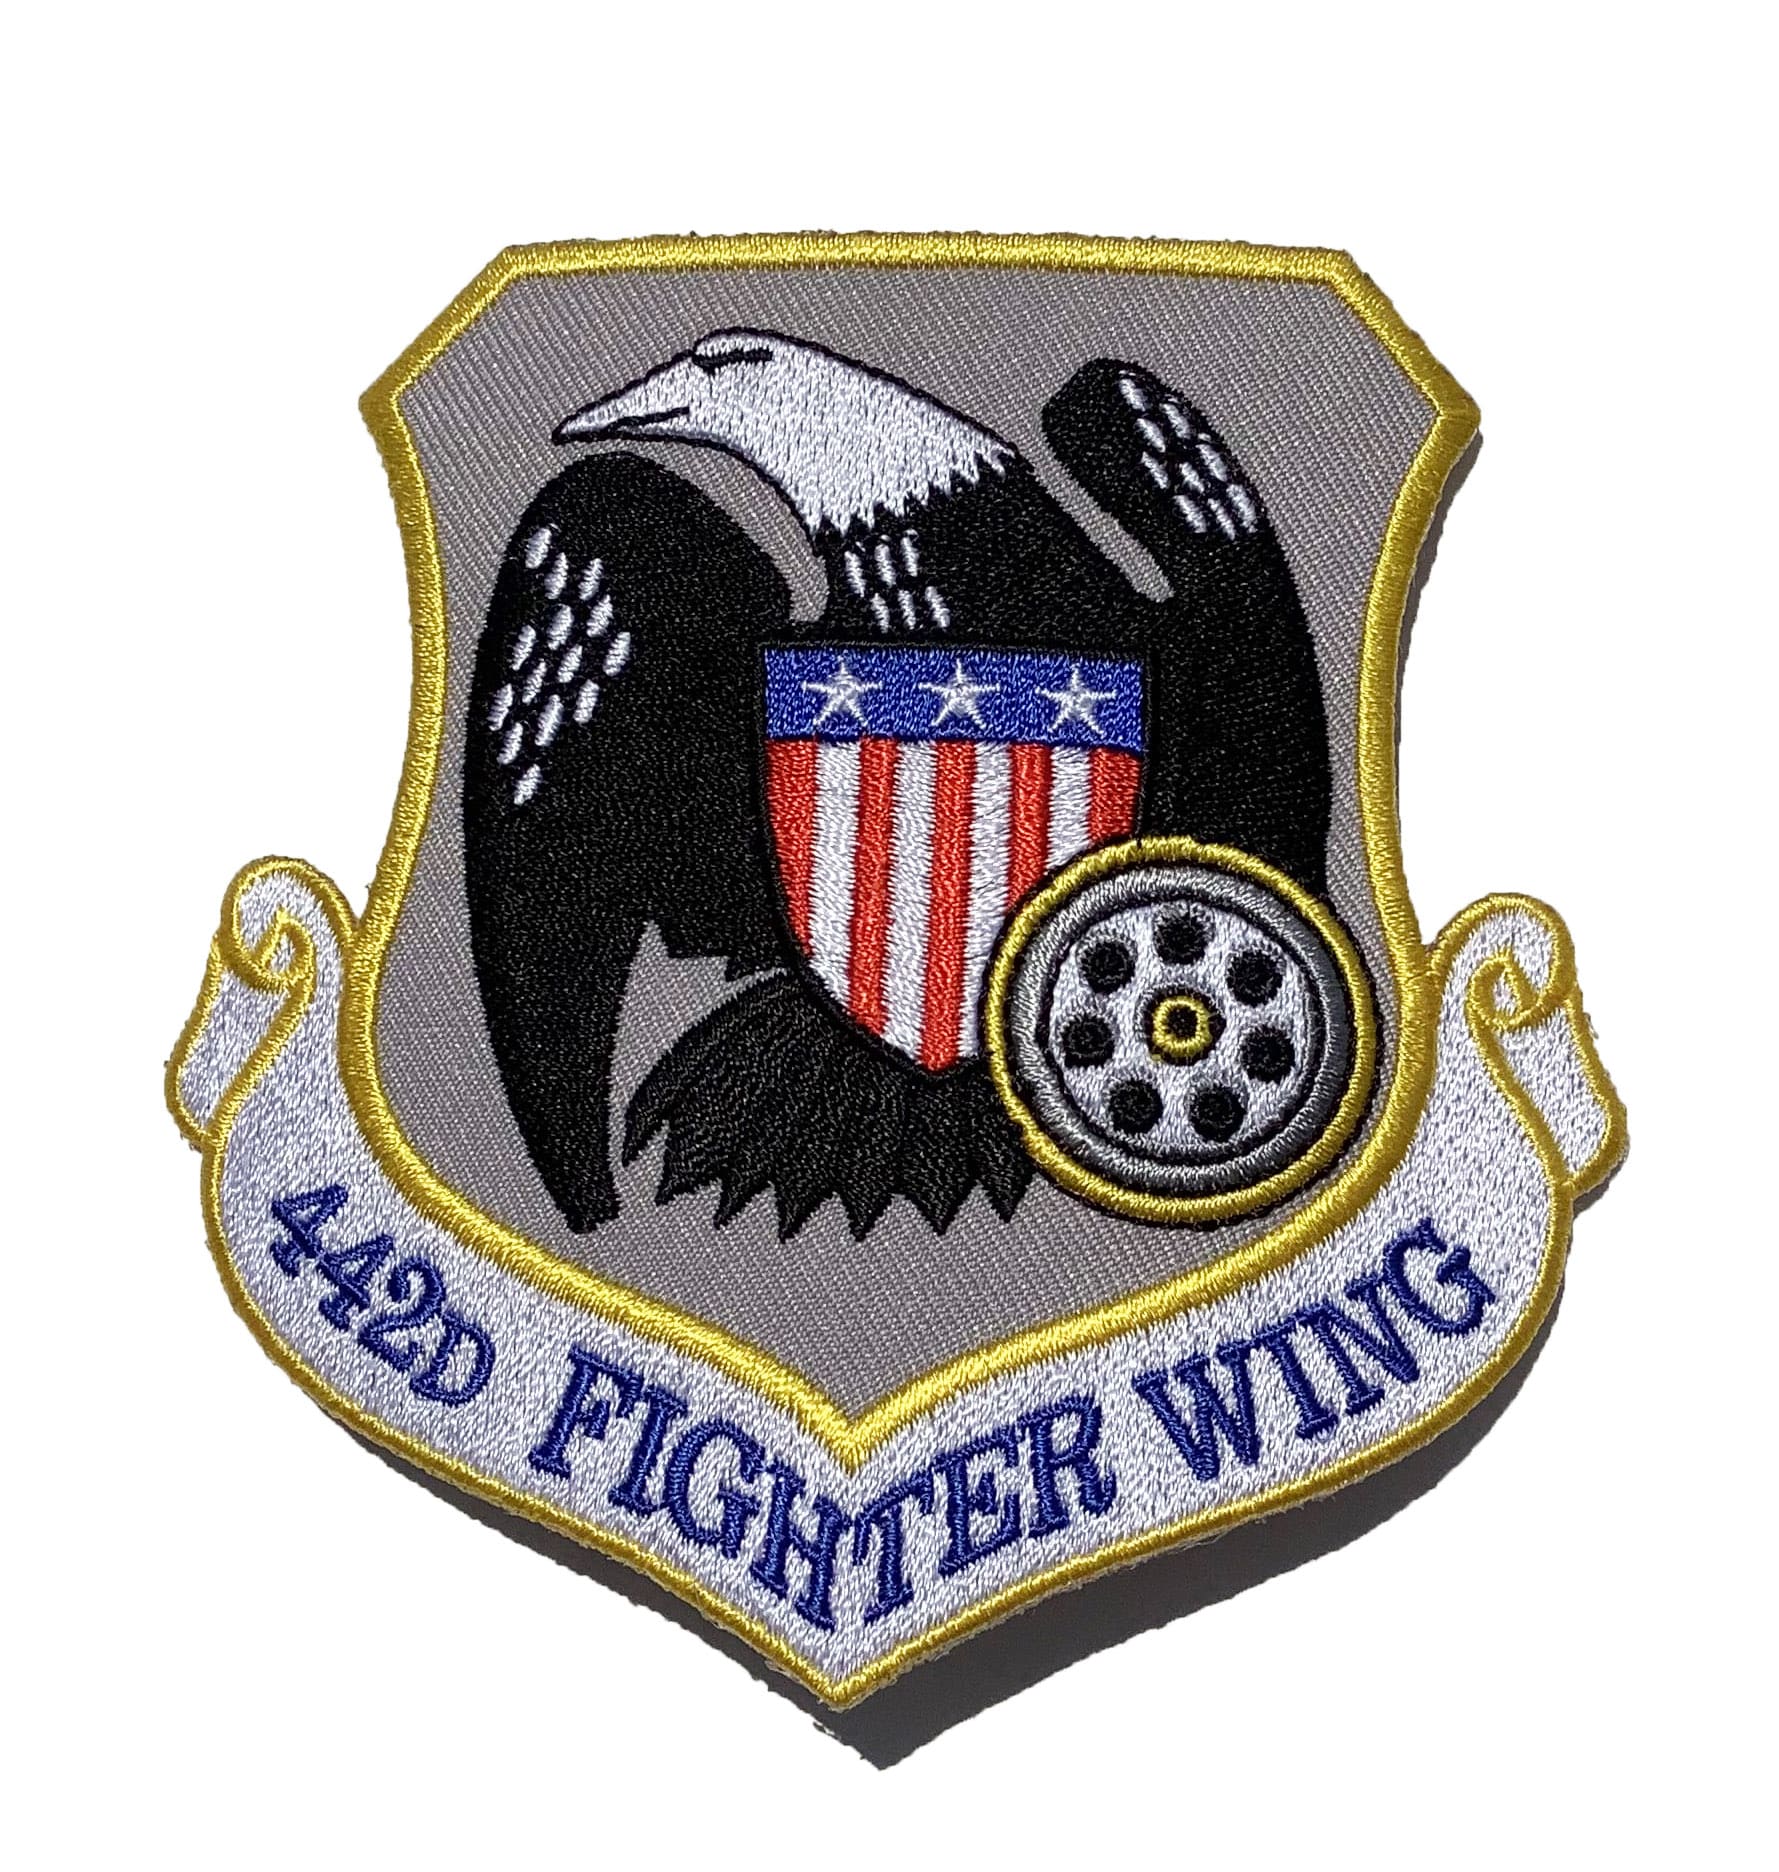 442nd Fighter Wing Patch